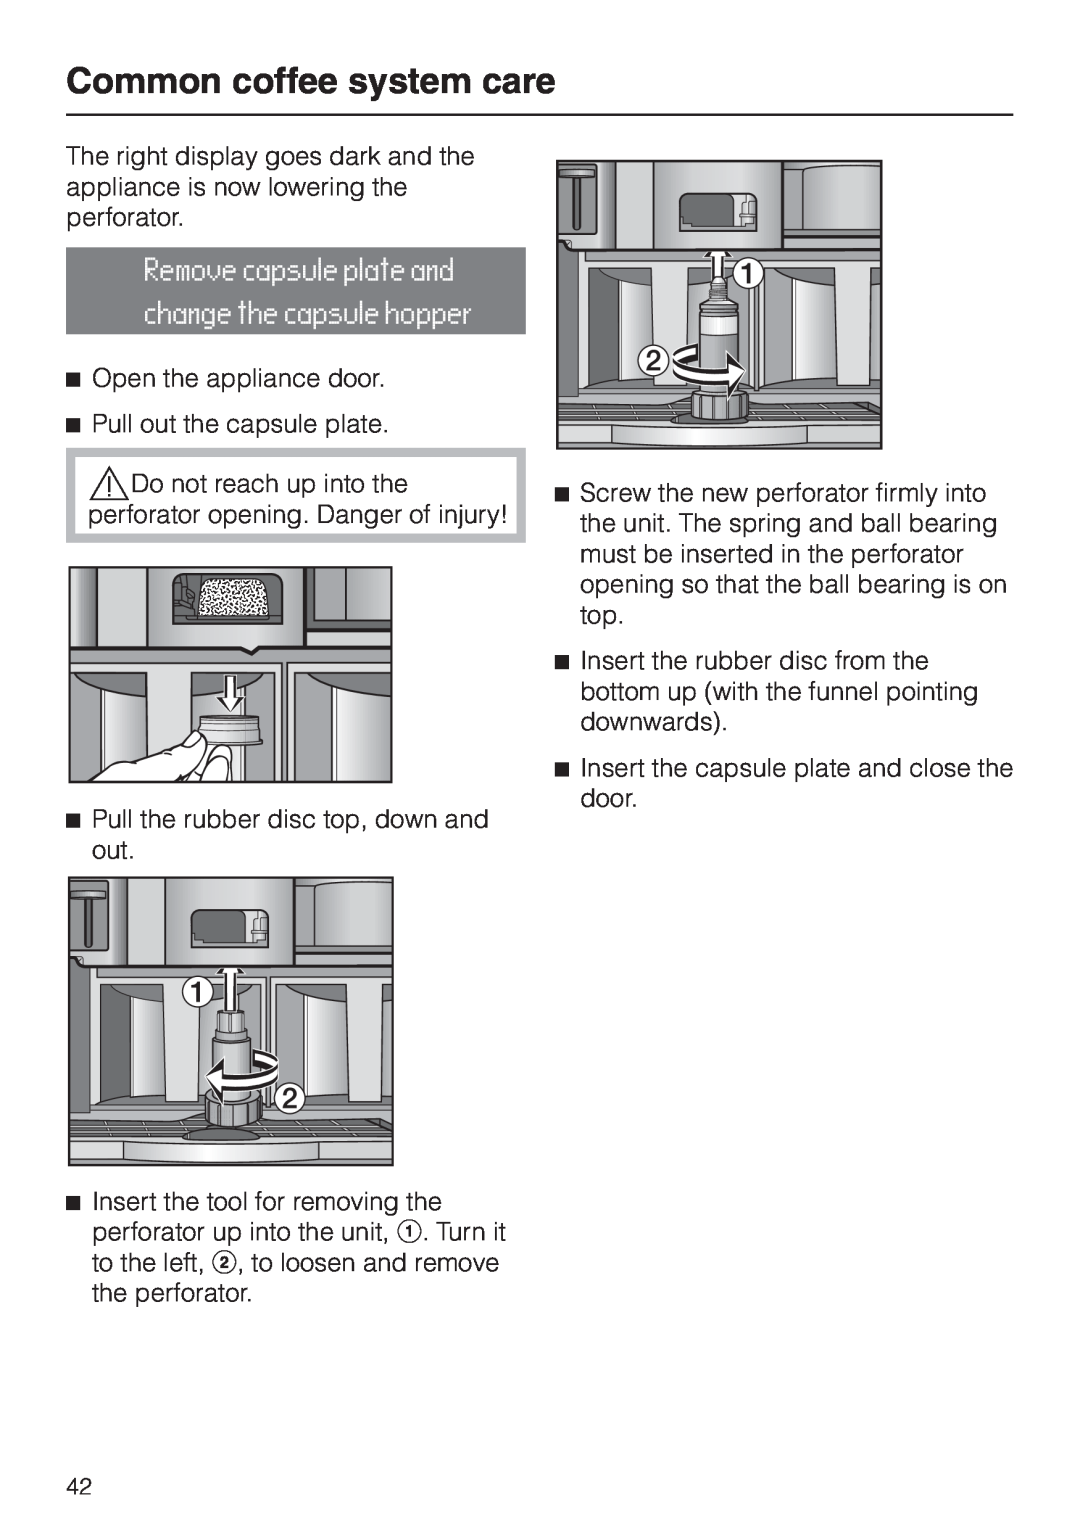 Miele CVA 2650 operating instructions Common coffee system care, Open the appliance door 